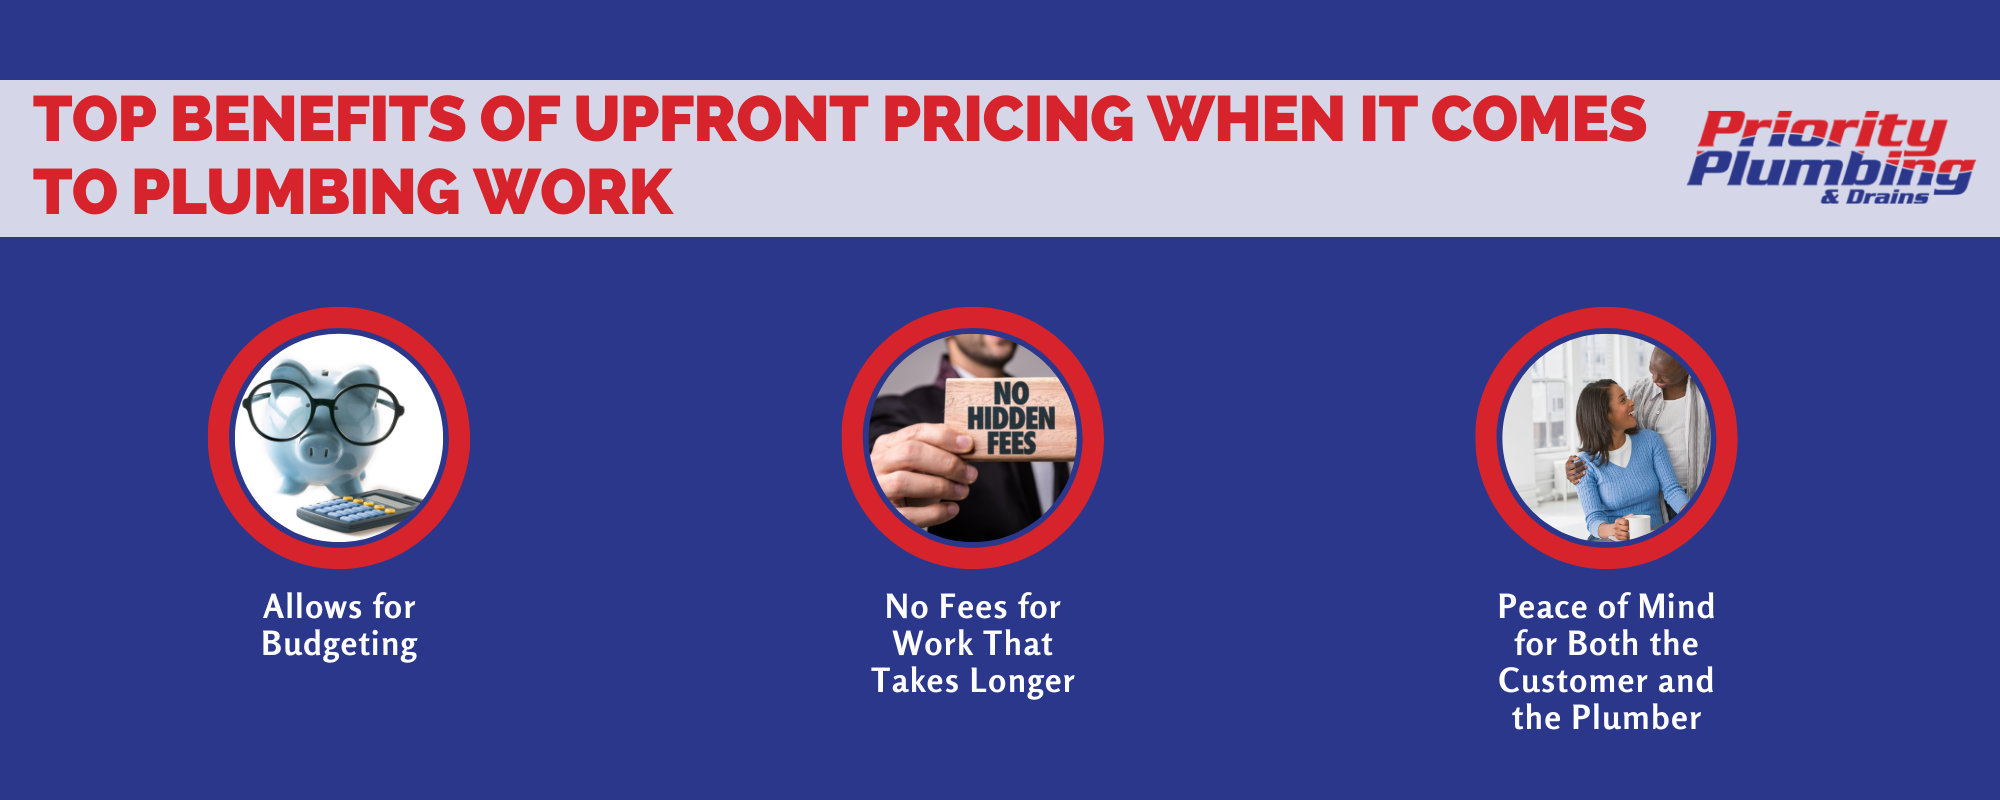 Benefits of Upfront Pricing infographic